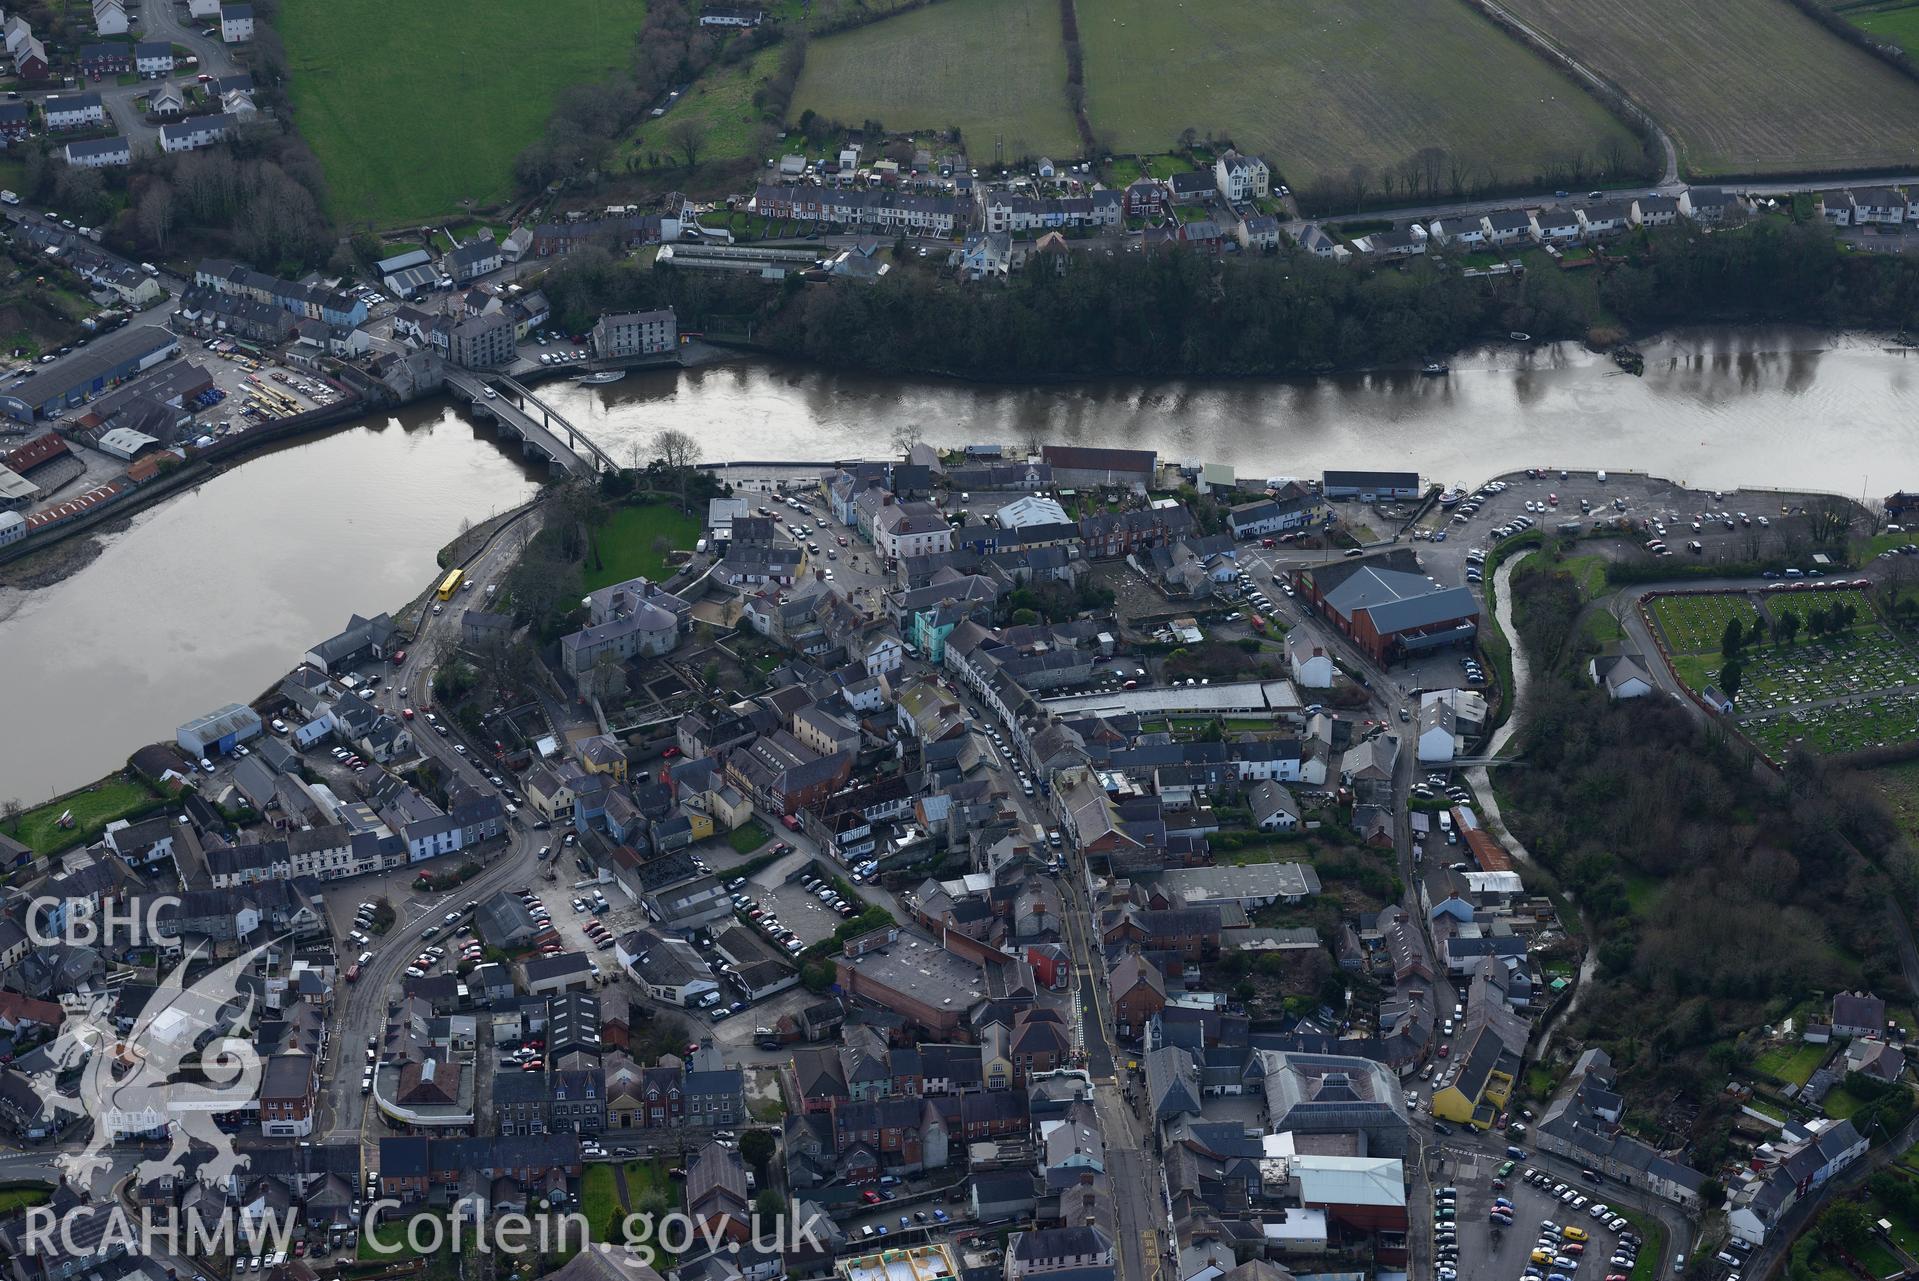 Cardigan Castle and the castle house; Cardigan Bridge and the market hall, Cardigan. Oblique aerial photograph taken during the Royal Commission's programme of archaeological aerial reconnaissance by Toby Driver on 13th March 2015.